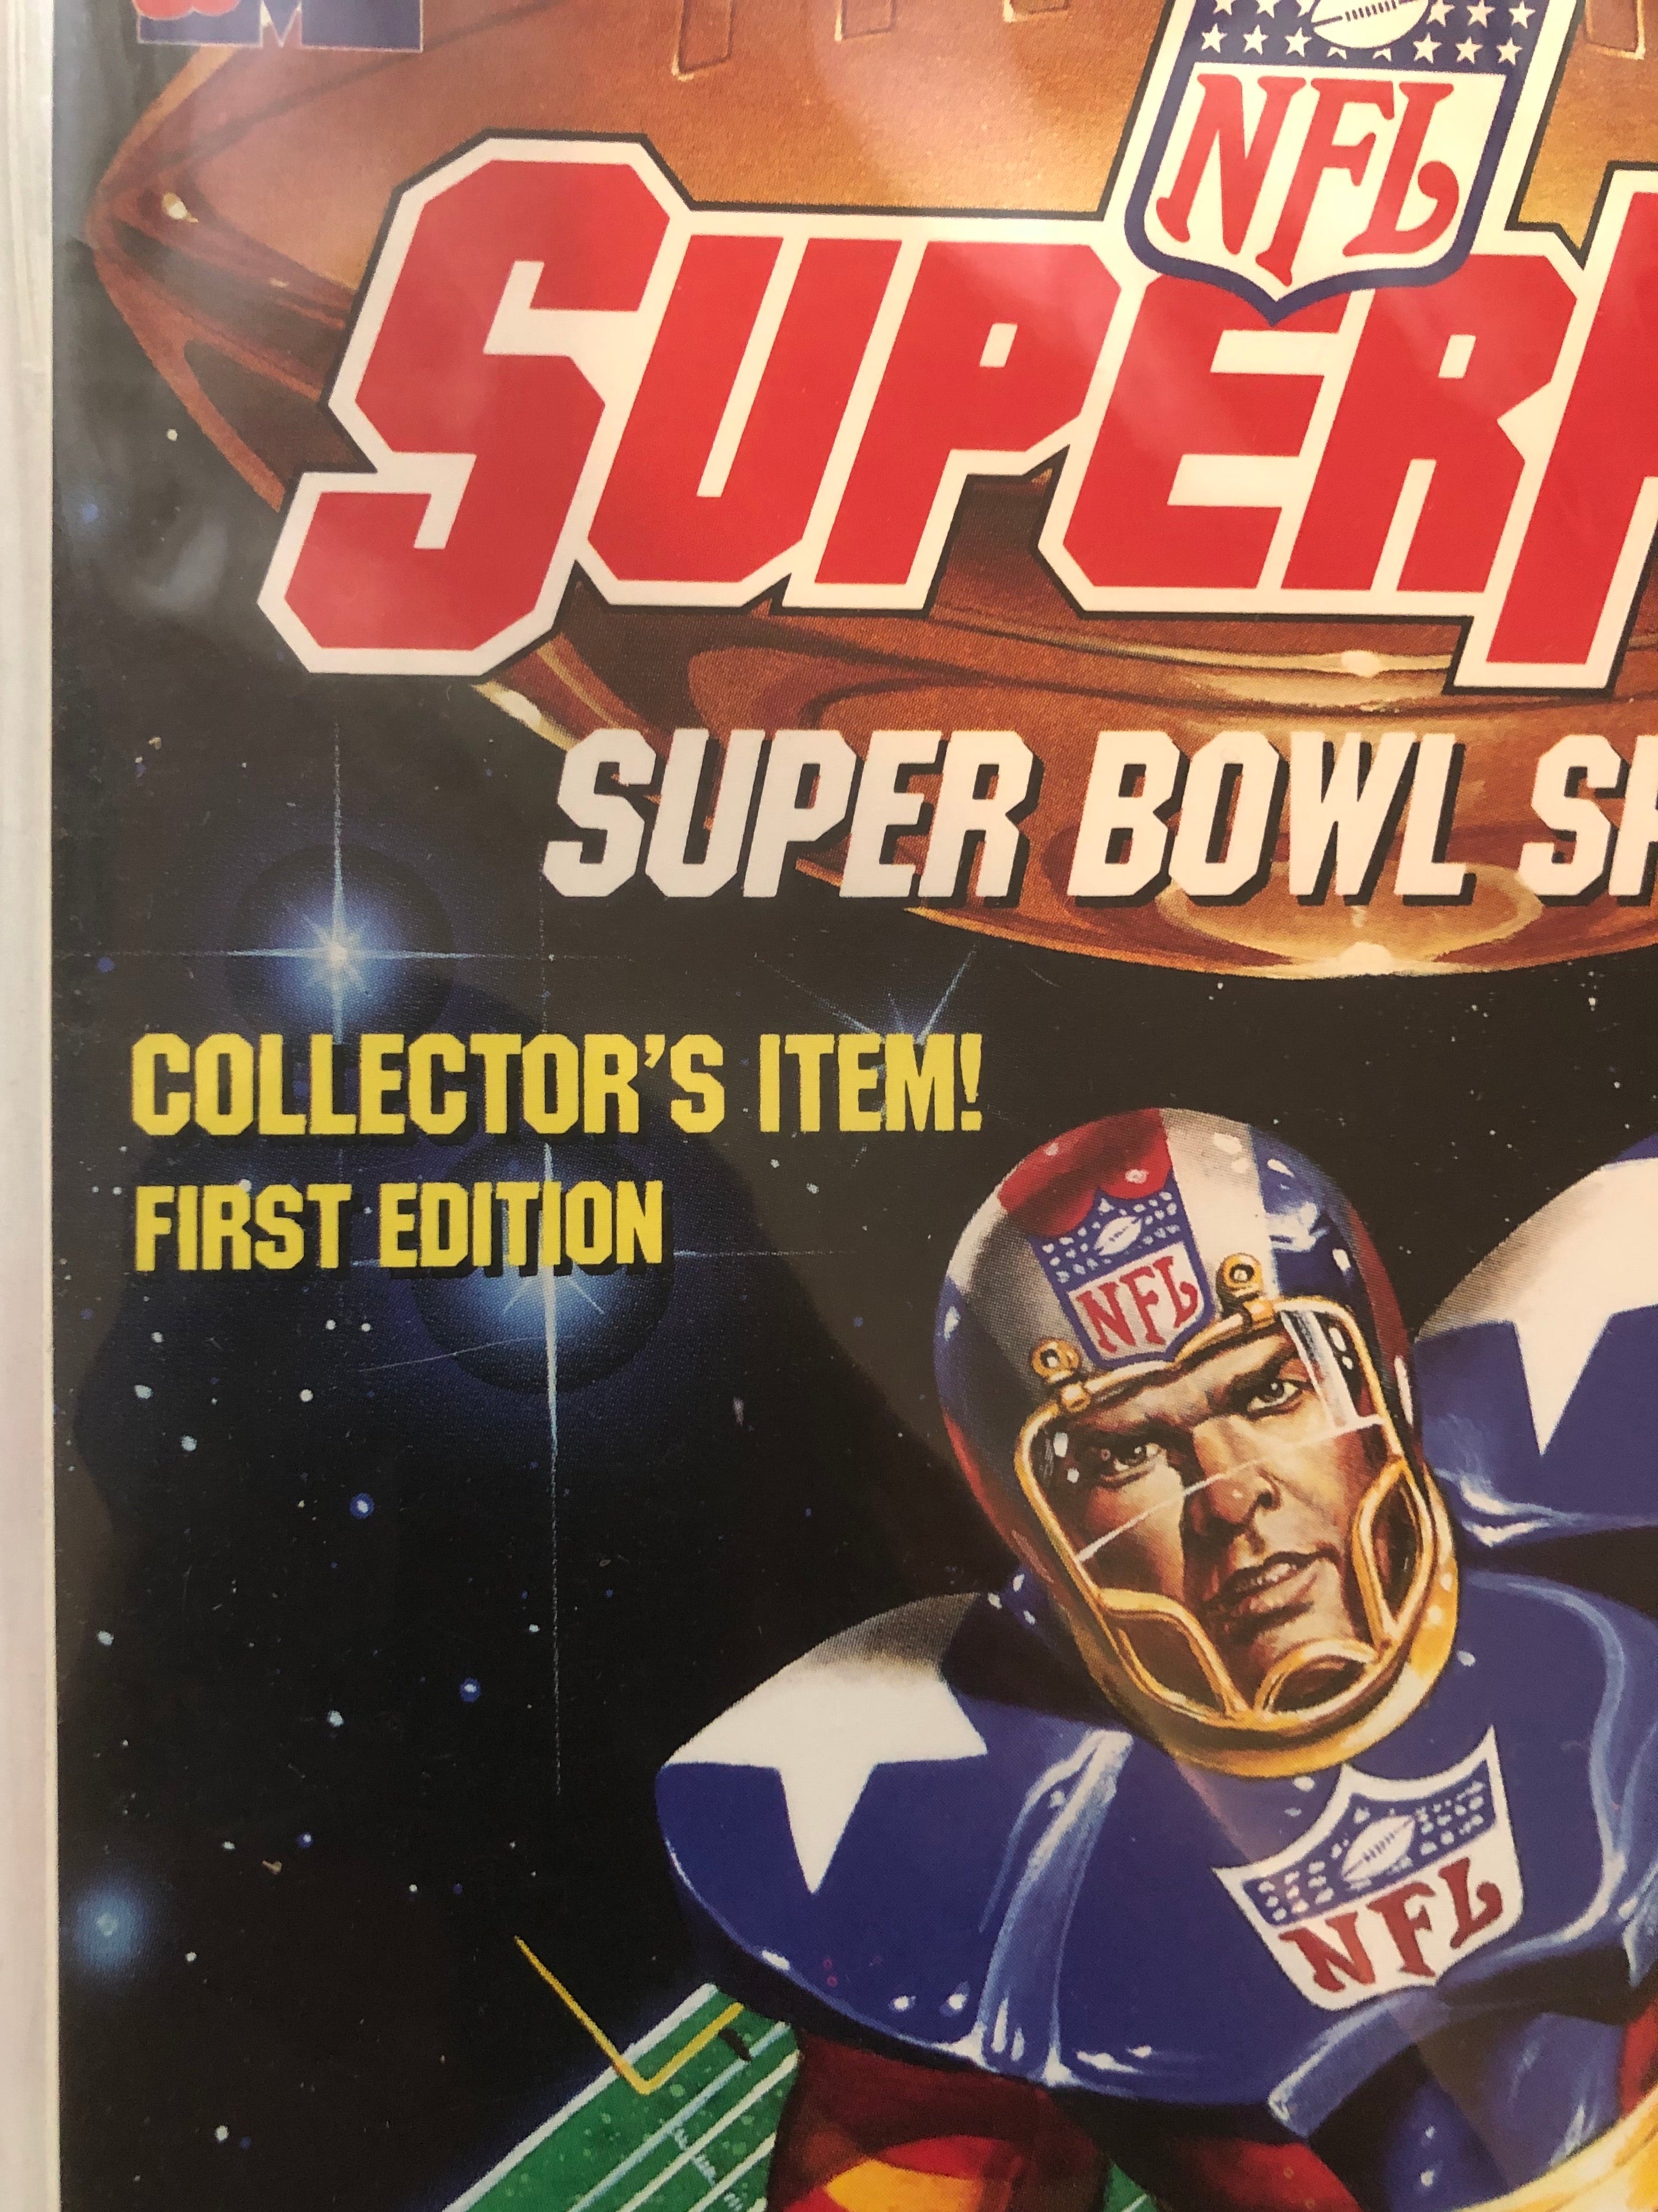 Superpro Super Bowl #1 special issue comic 1990s